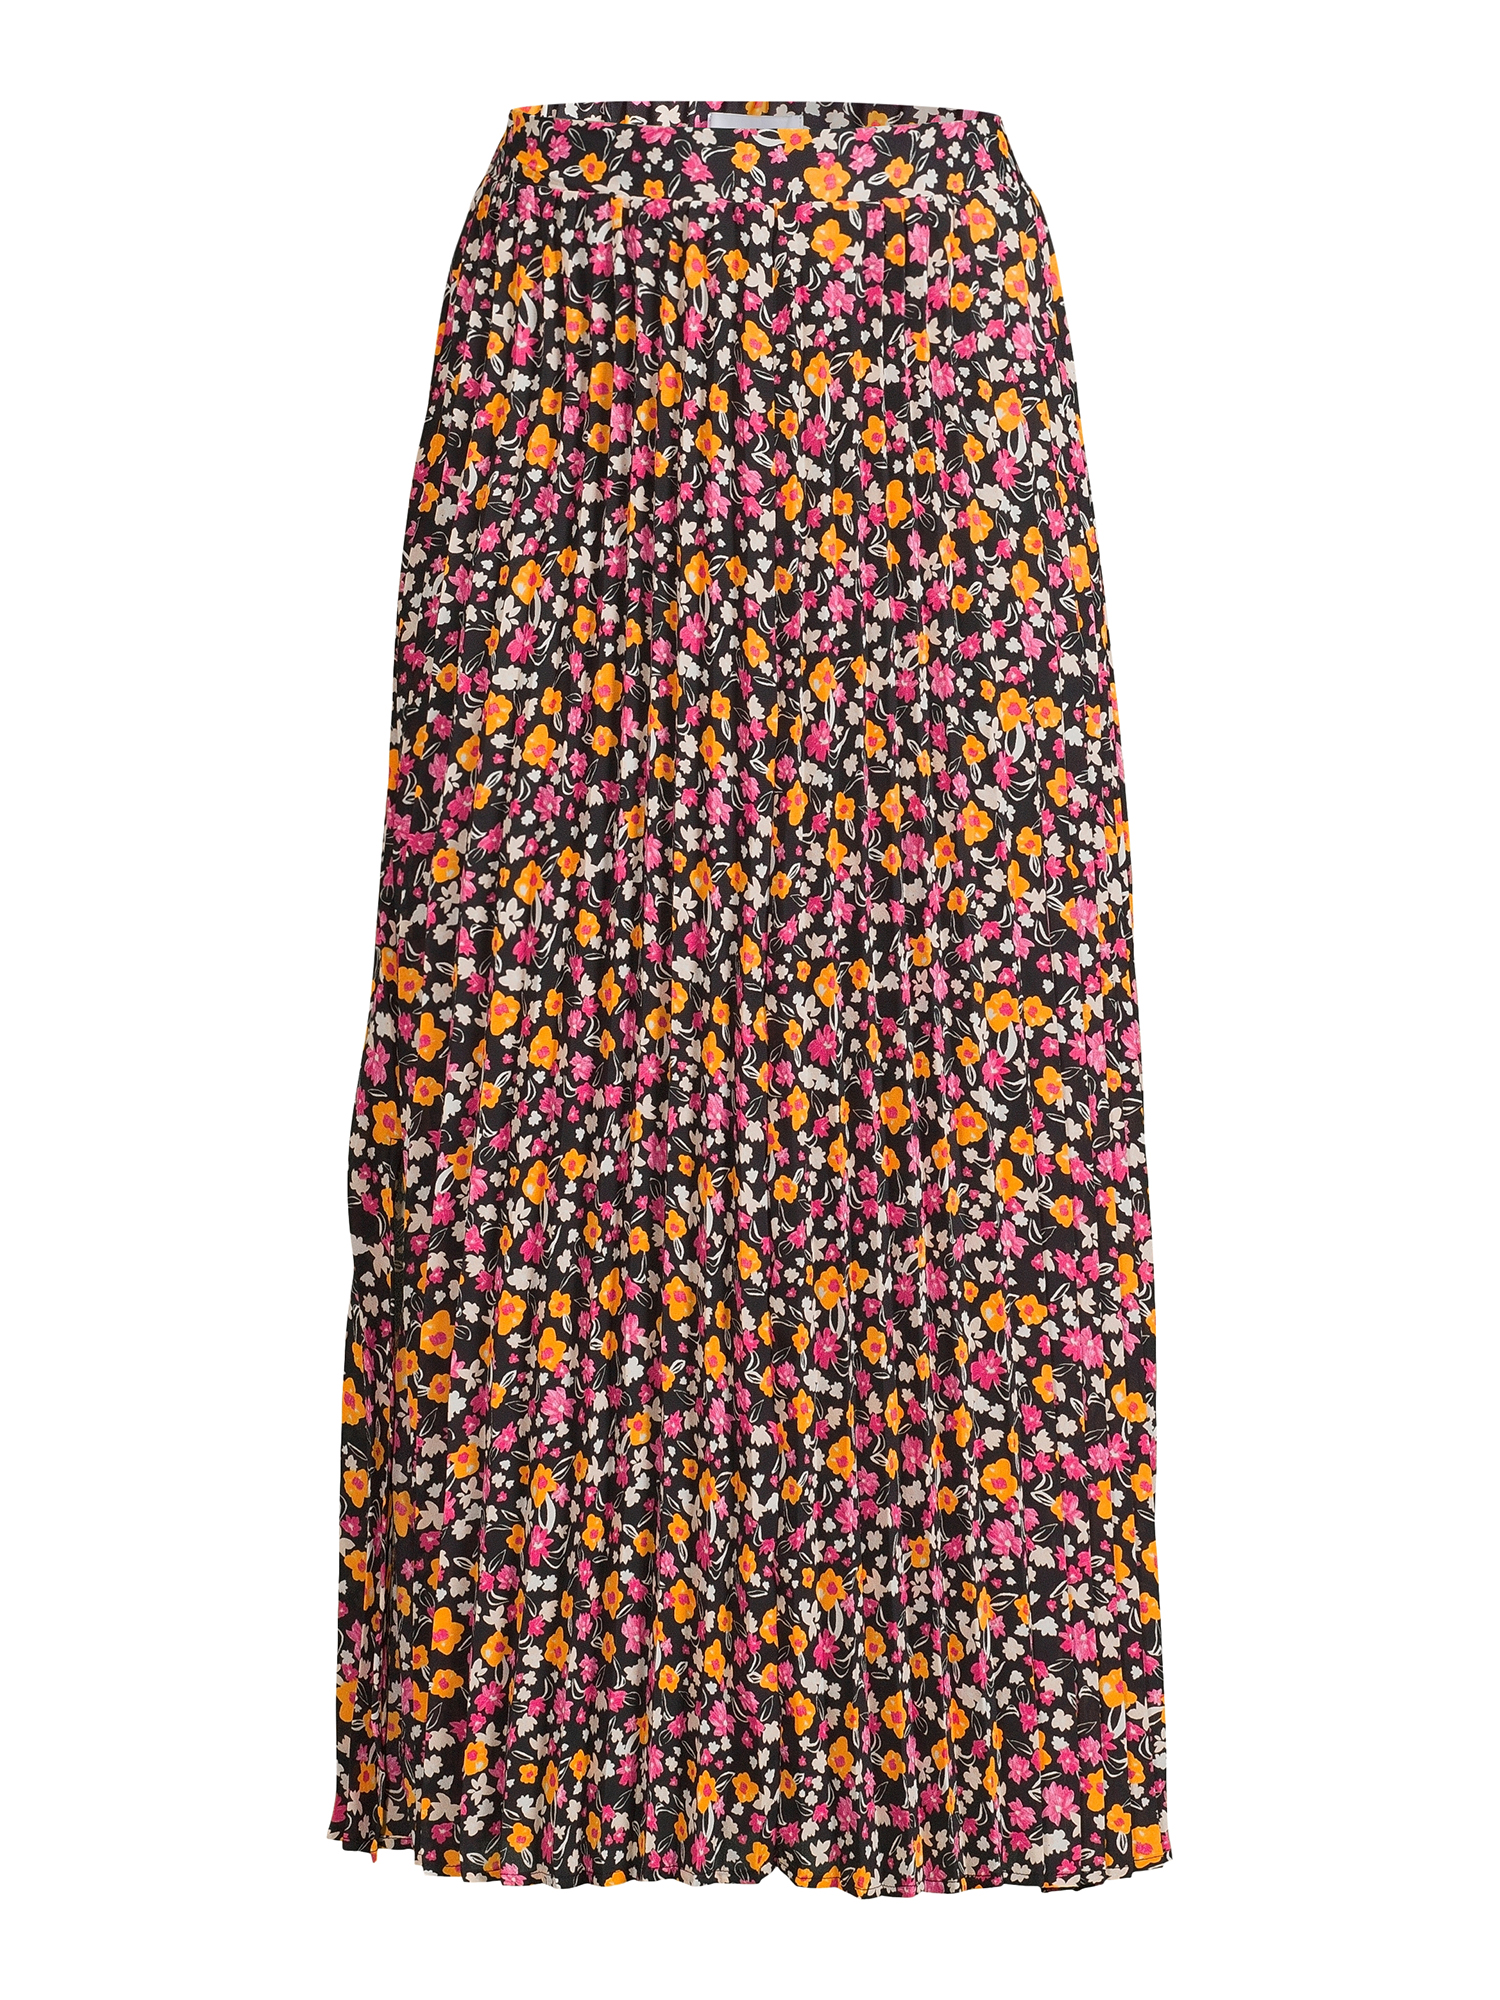 The Get Women's Pleated Maxi Skirt - image 5 of 5